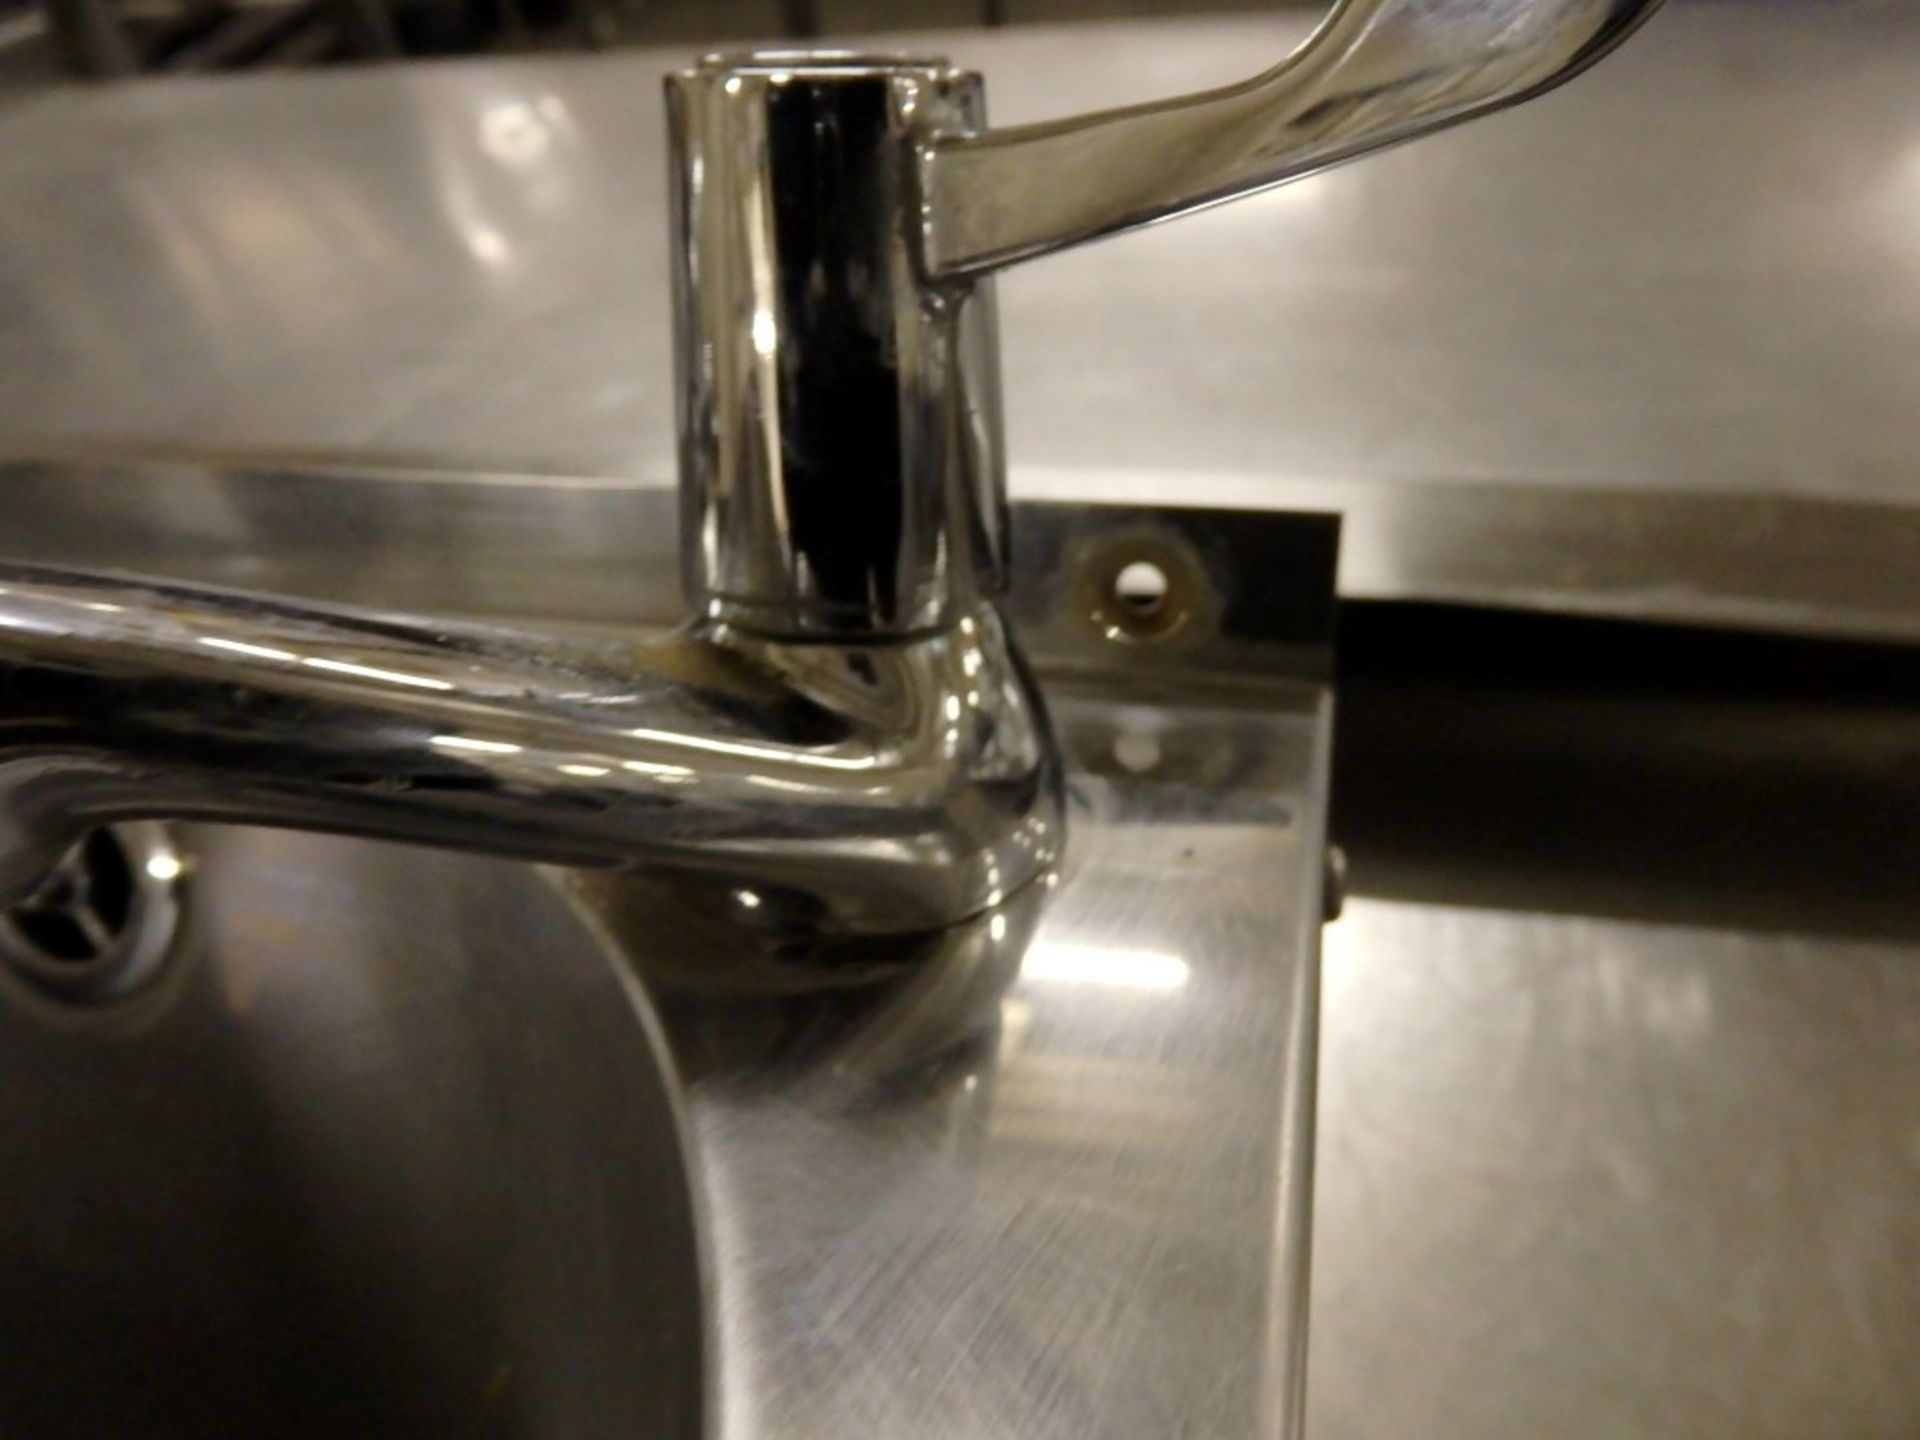 1 x Stainless Steel Wall Mounted Sink Basin - H30 x W34 x D35cm - Suitable For Commercial Kitchens - - Image 4 of 9